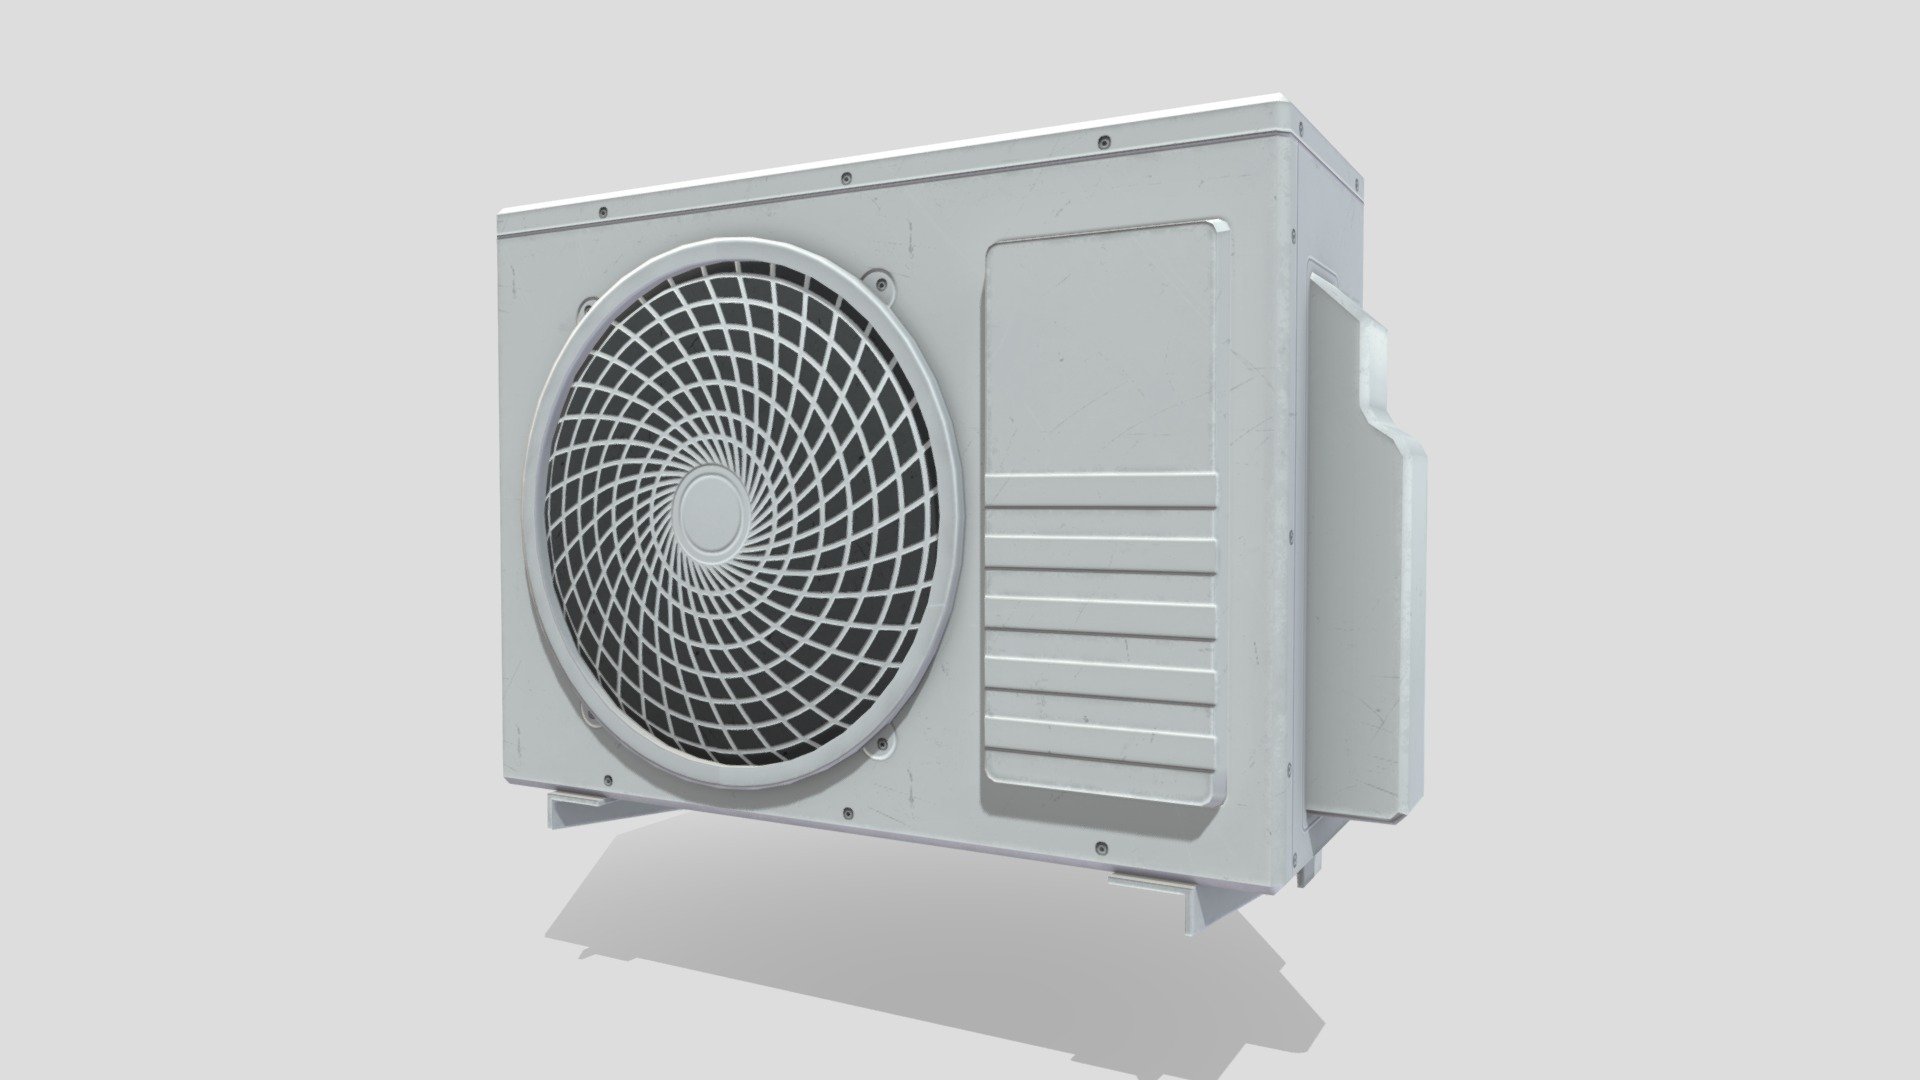 3D Air_Conditioner outside
The pack has highly detailed air conditioner ready for use in your project. Just drag and drop prefab into your scene and achieve beautiful results in no time. Available formats FBX, 3DS Max 2017



We are here to empower the creators. Please contact us via the [Contact US](https://aaanimators.com/#contact-area) page if you are having issues with our assets. 




The following document provides a highly detailed description of the asset:
[READ ME](https://medium.com/@aaanimators/3d-asset-pack-low-poly-tables-pack-arabic-21125c8bb0f7)




**Mesh complexities:**


Table_05 812 verts; 792 tris 



Includes 1 sets of materials with 3 textures:



● Diffuse

● Normal

● Specular - Air Conditioner Outside - Buy Royalty Free 3D model by aaanimators 3d model